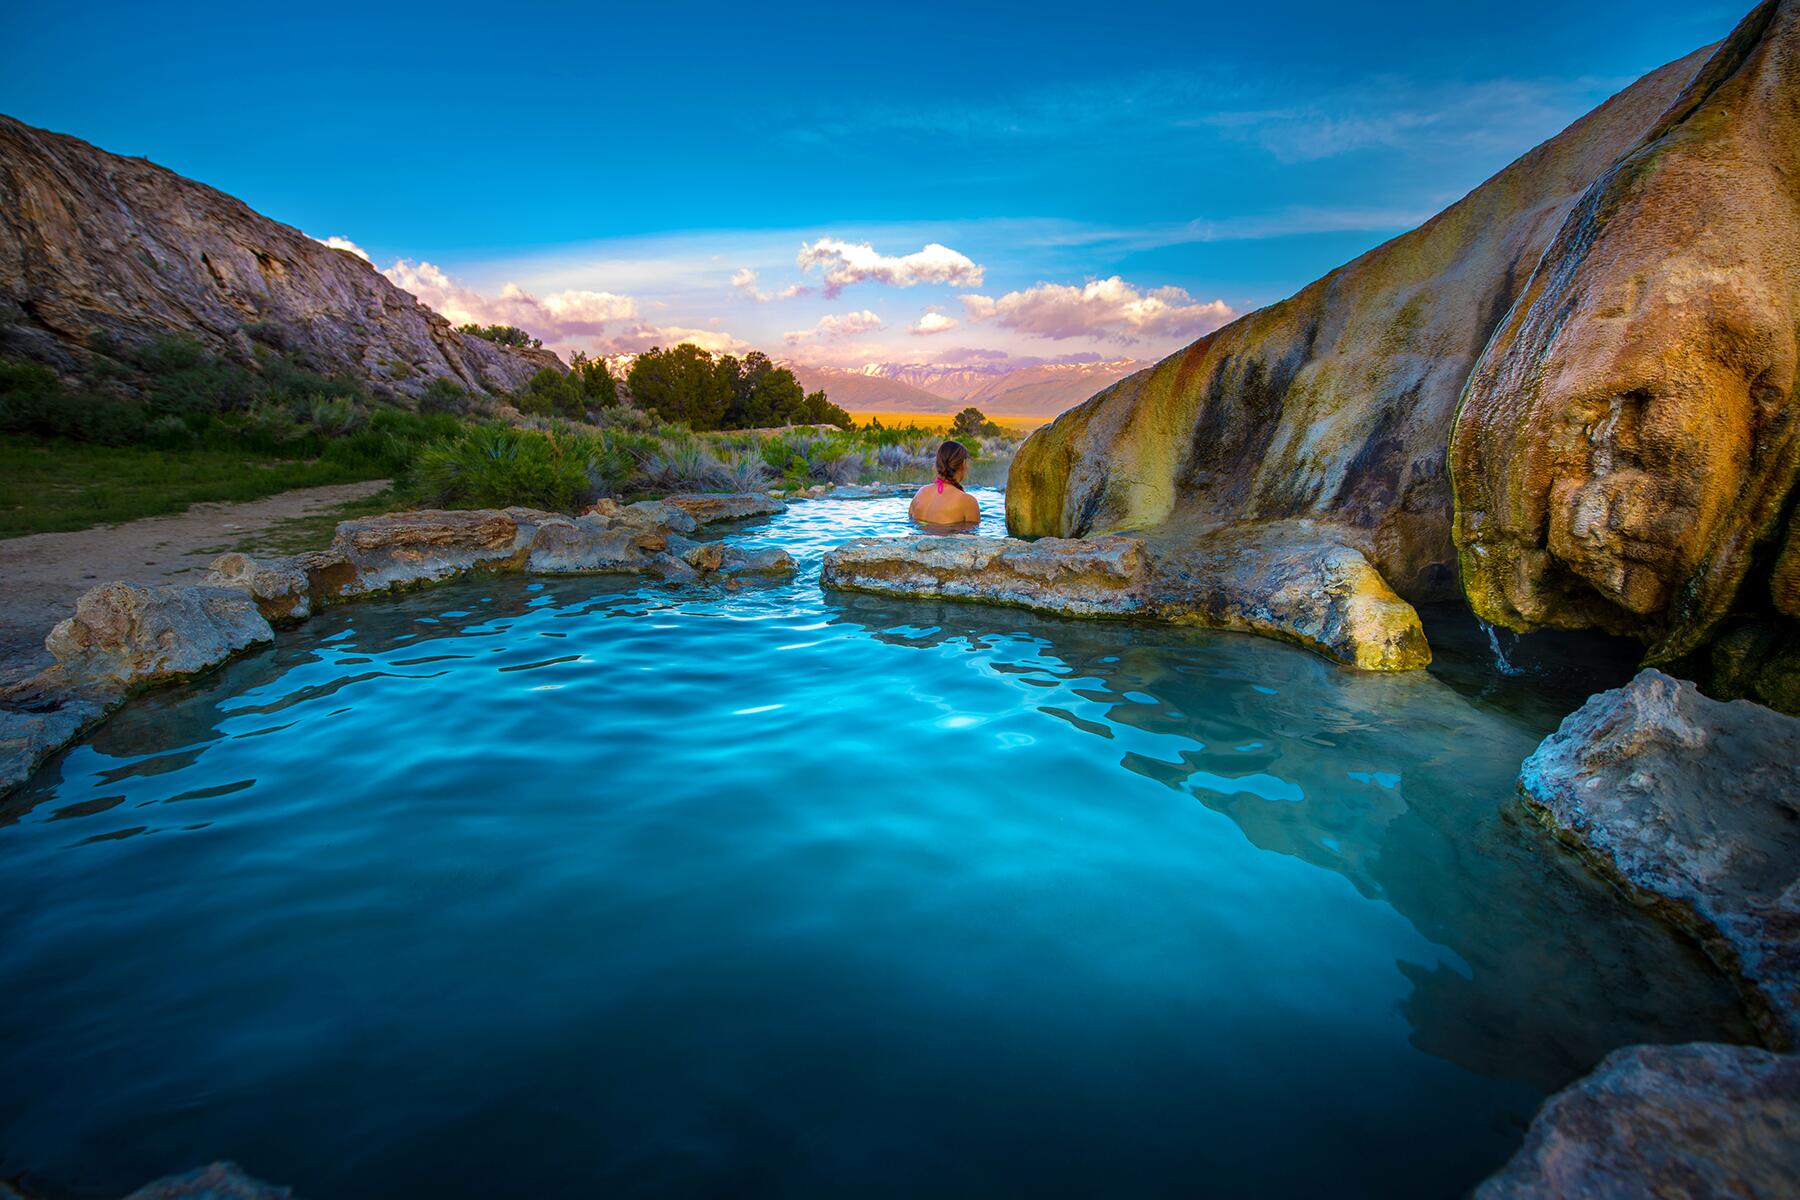 The Best Hot Springs in the U.S. Where You Can Soak Your Weary Bones